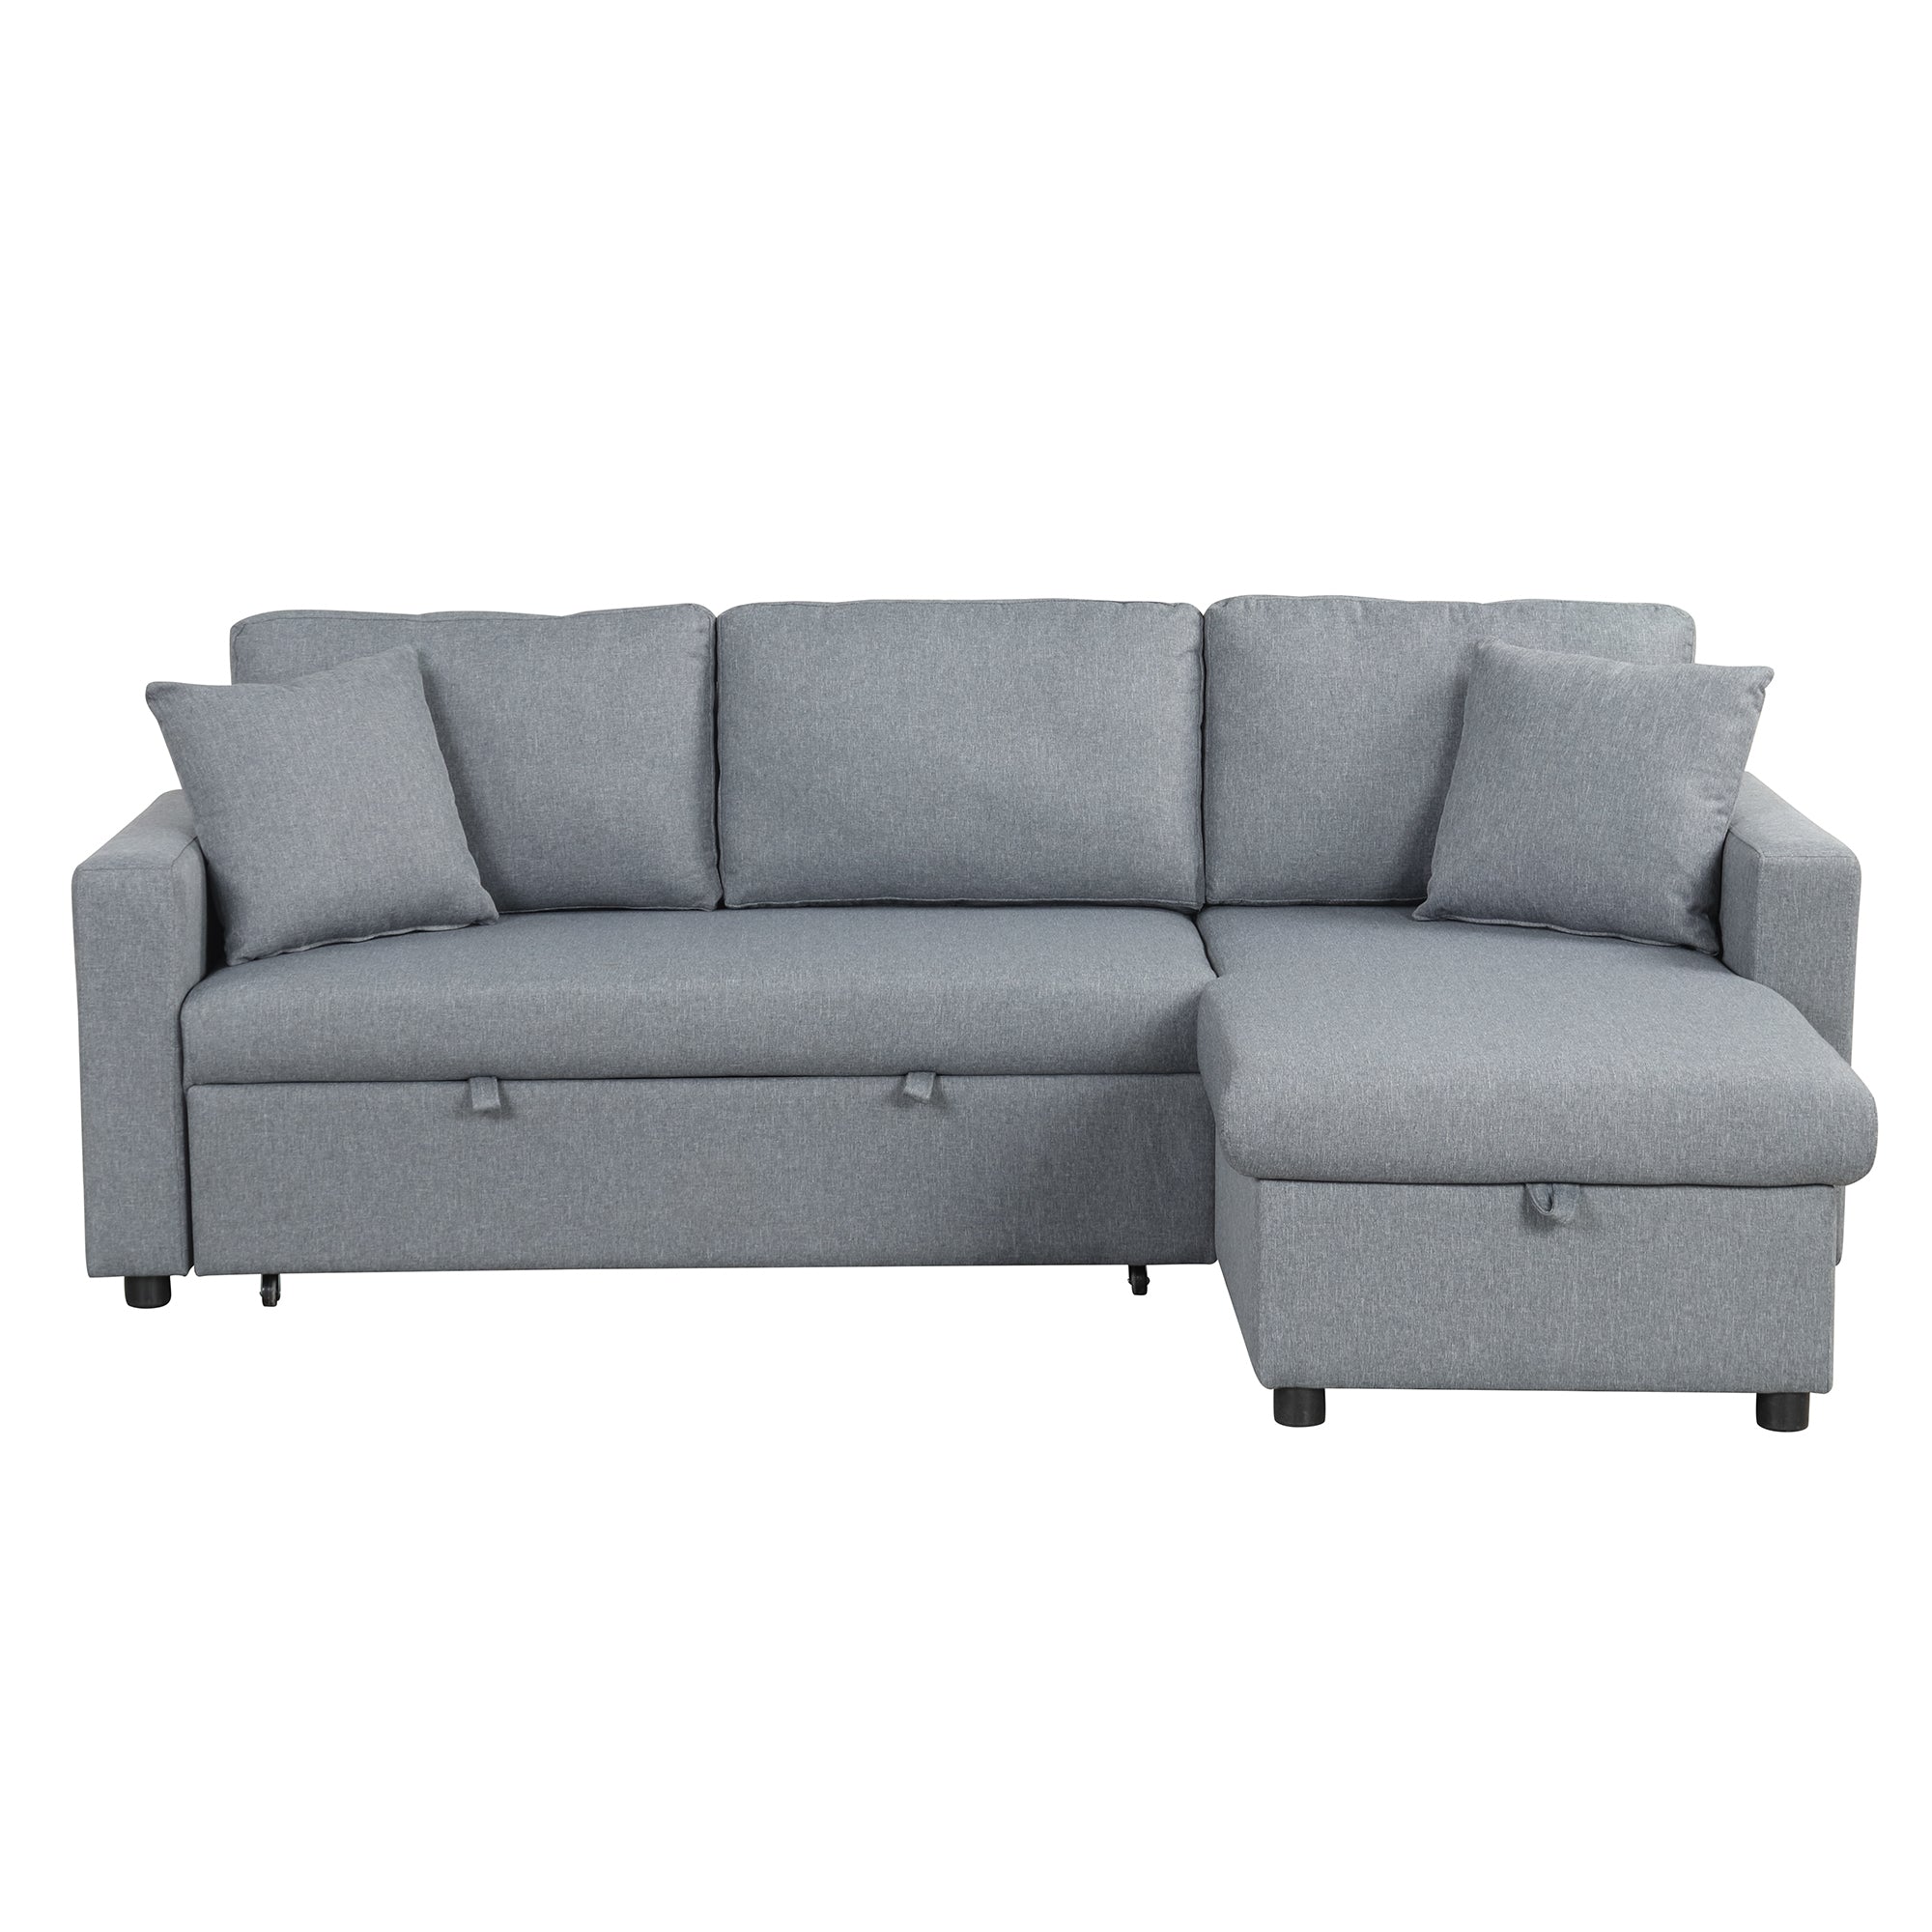 Grey Upholstery Sleeper Sectional Sofa: Storage, 2 Tossing Cushions-Sleeper Sectionals-American Furniture Outlet